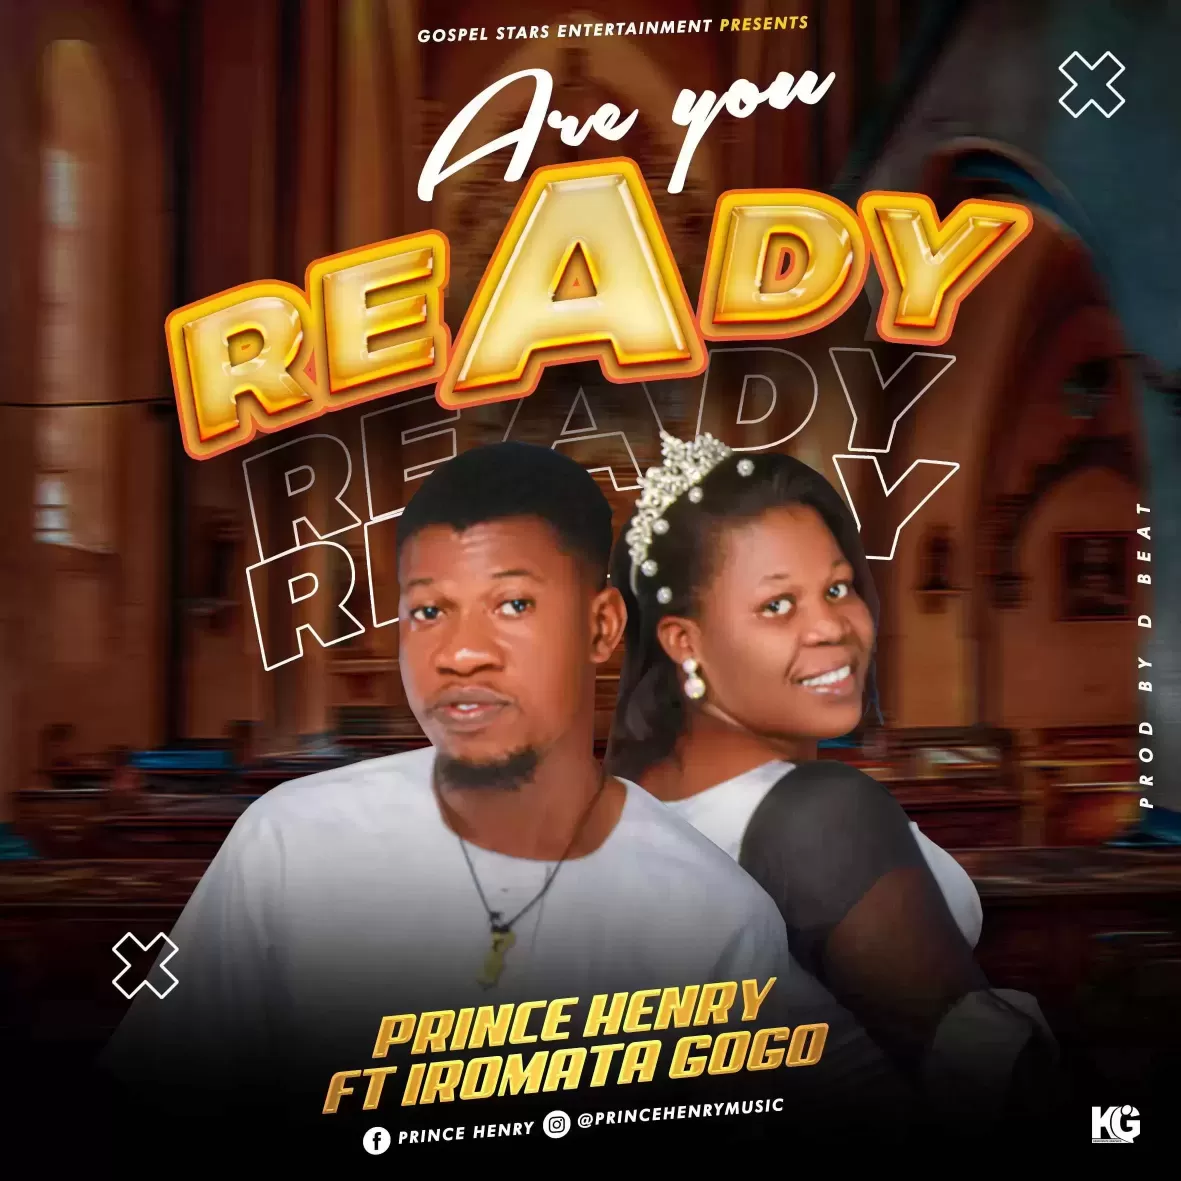 Are you ready by Prince Henry ft Iromata Gogo